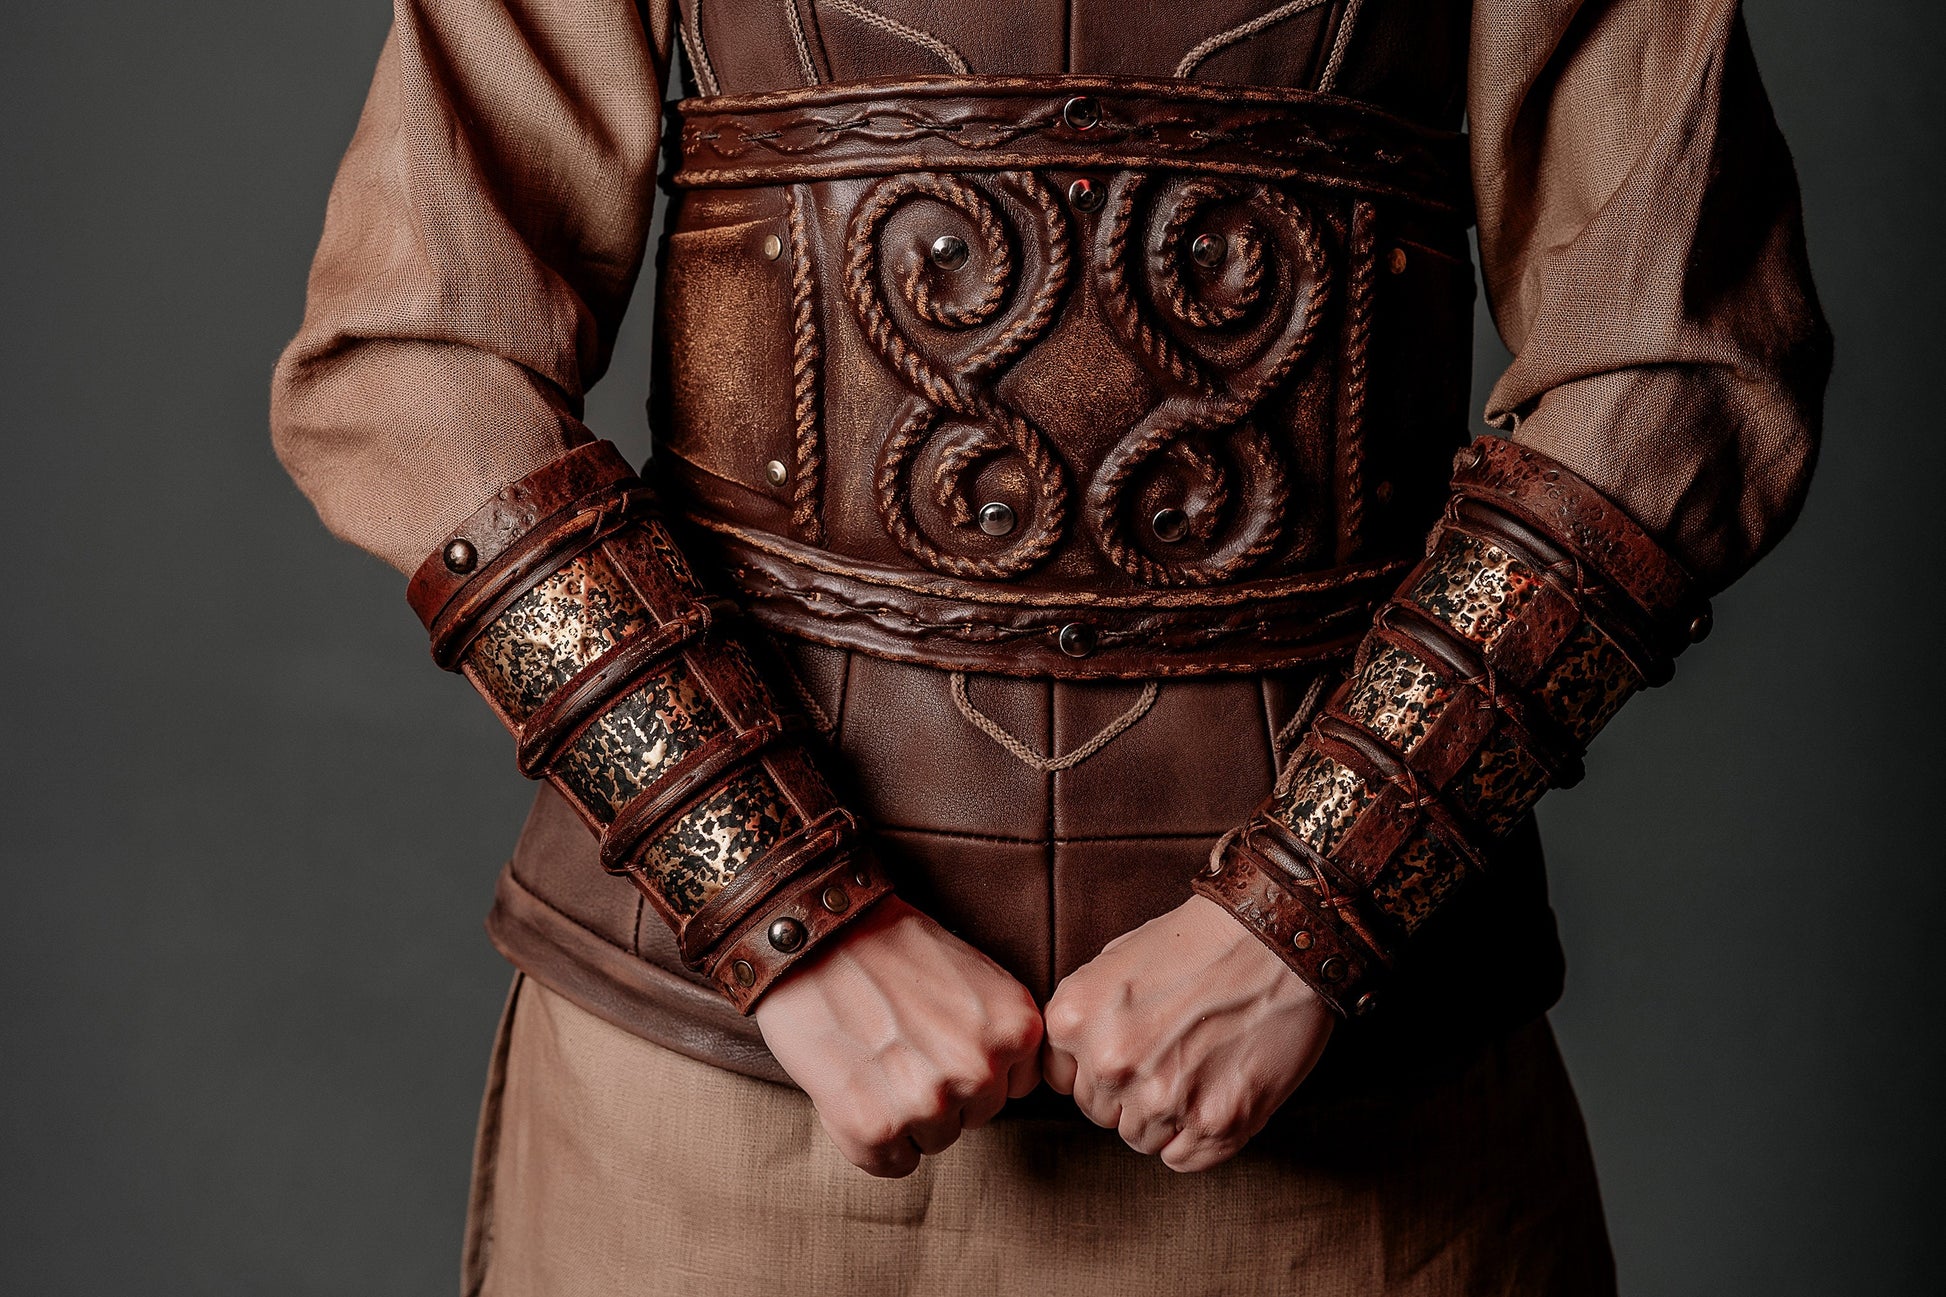 Leather bracers from armor costume in style of Bëor the Old